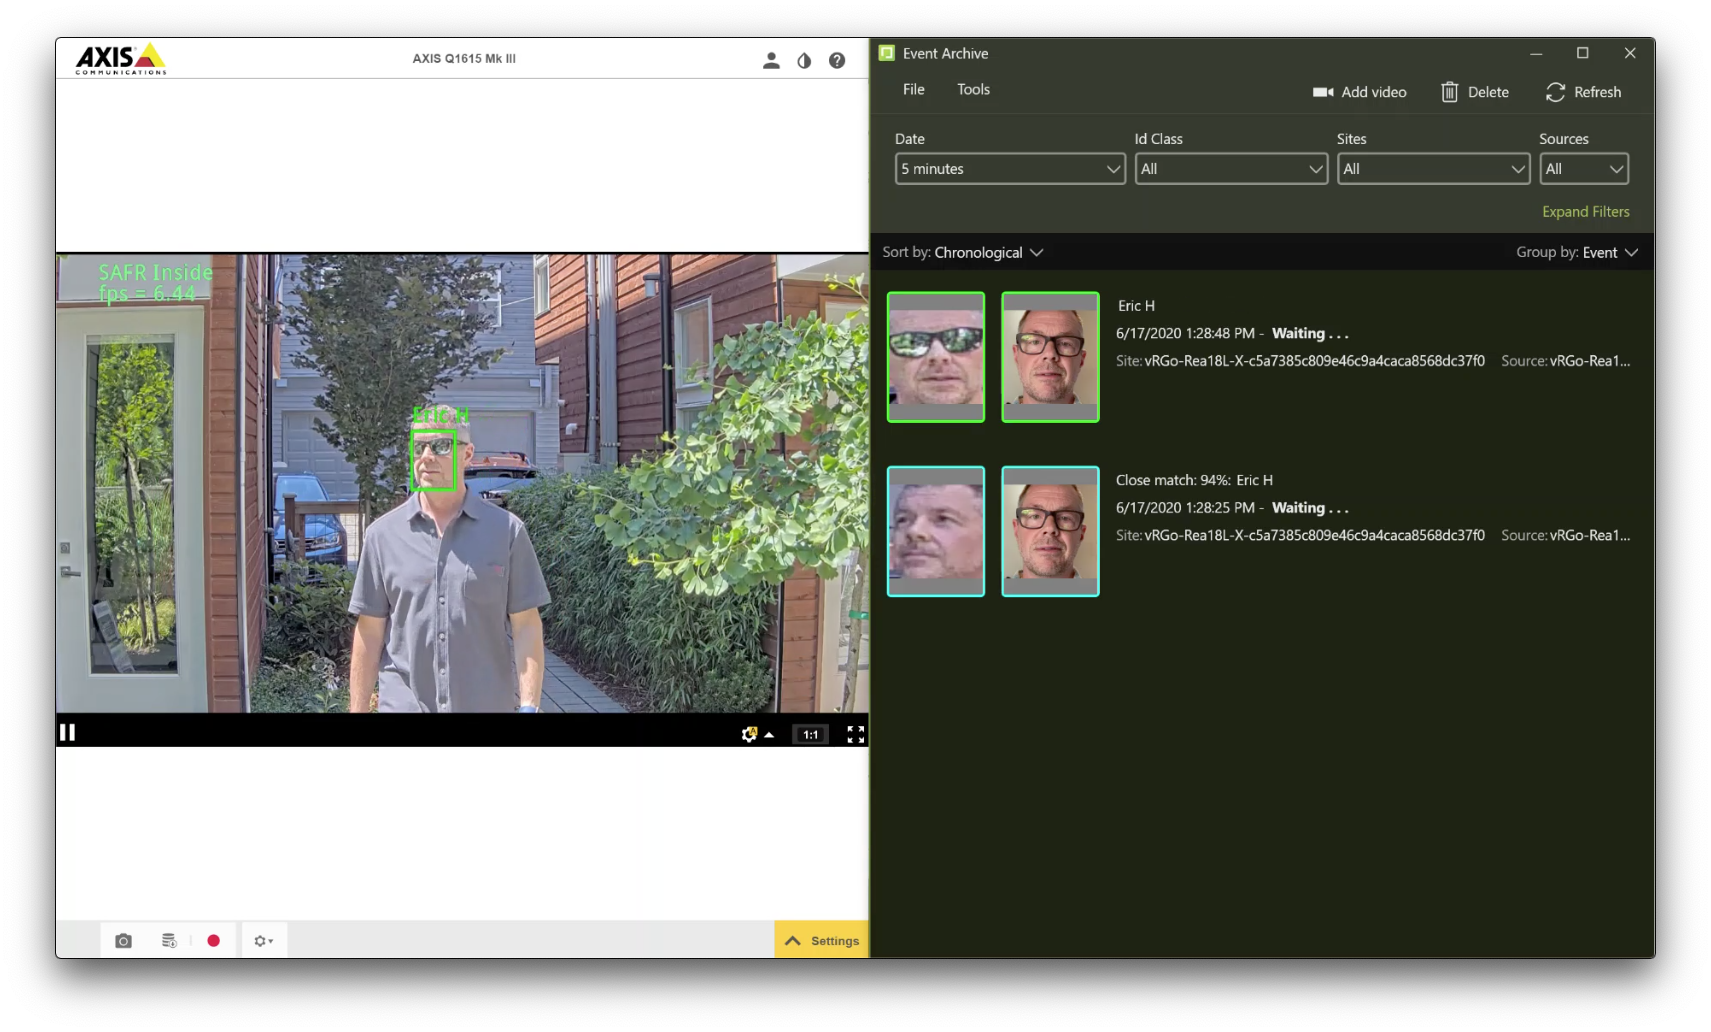 SAFR Inside running on the AXIS Q1615 Mk III Network Camera, performing face detection in-camera and biometric matching in the SAFR Cloud platform. Face recognition results and associated event meta data is displayed in real time in the SAFR web console, and desktop client (pictured), applications.